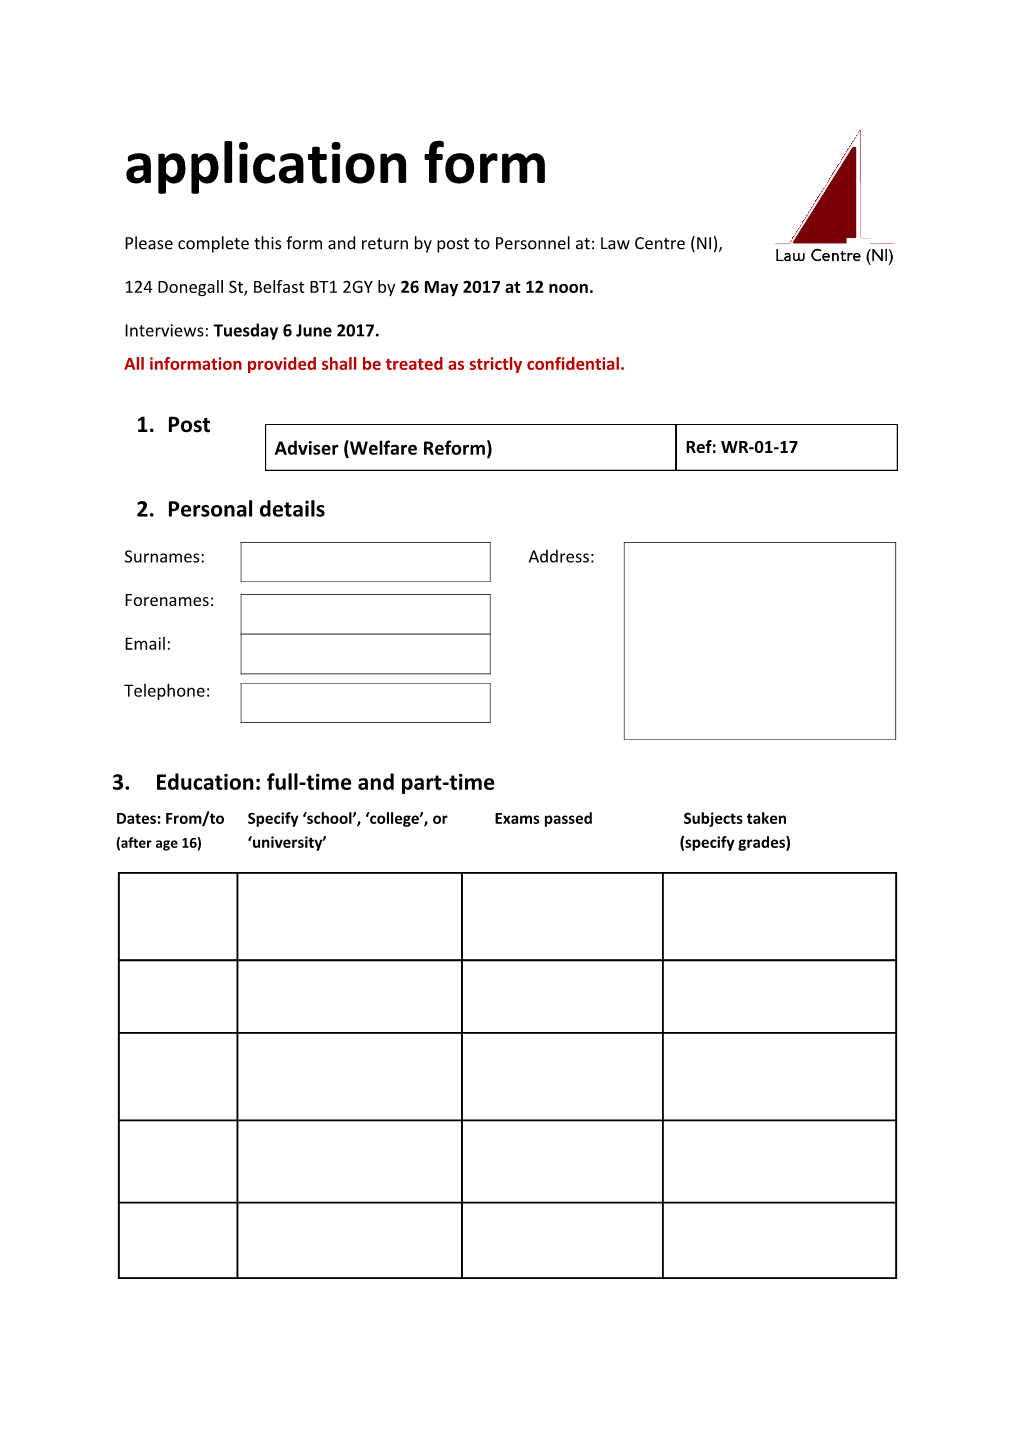 Please Complete This Form and Return by Post to Personnel At: Law Centre (NI)